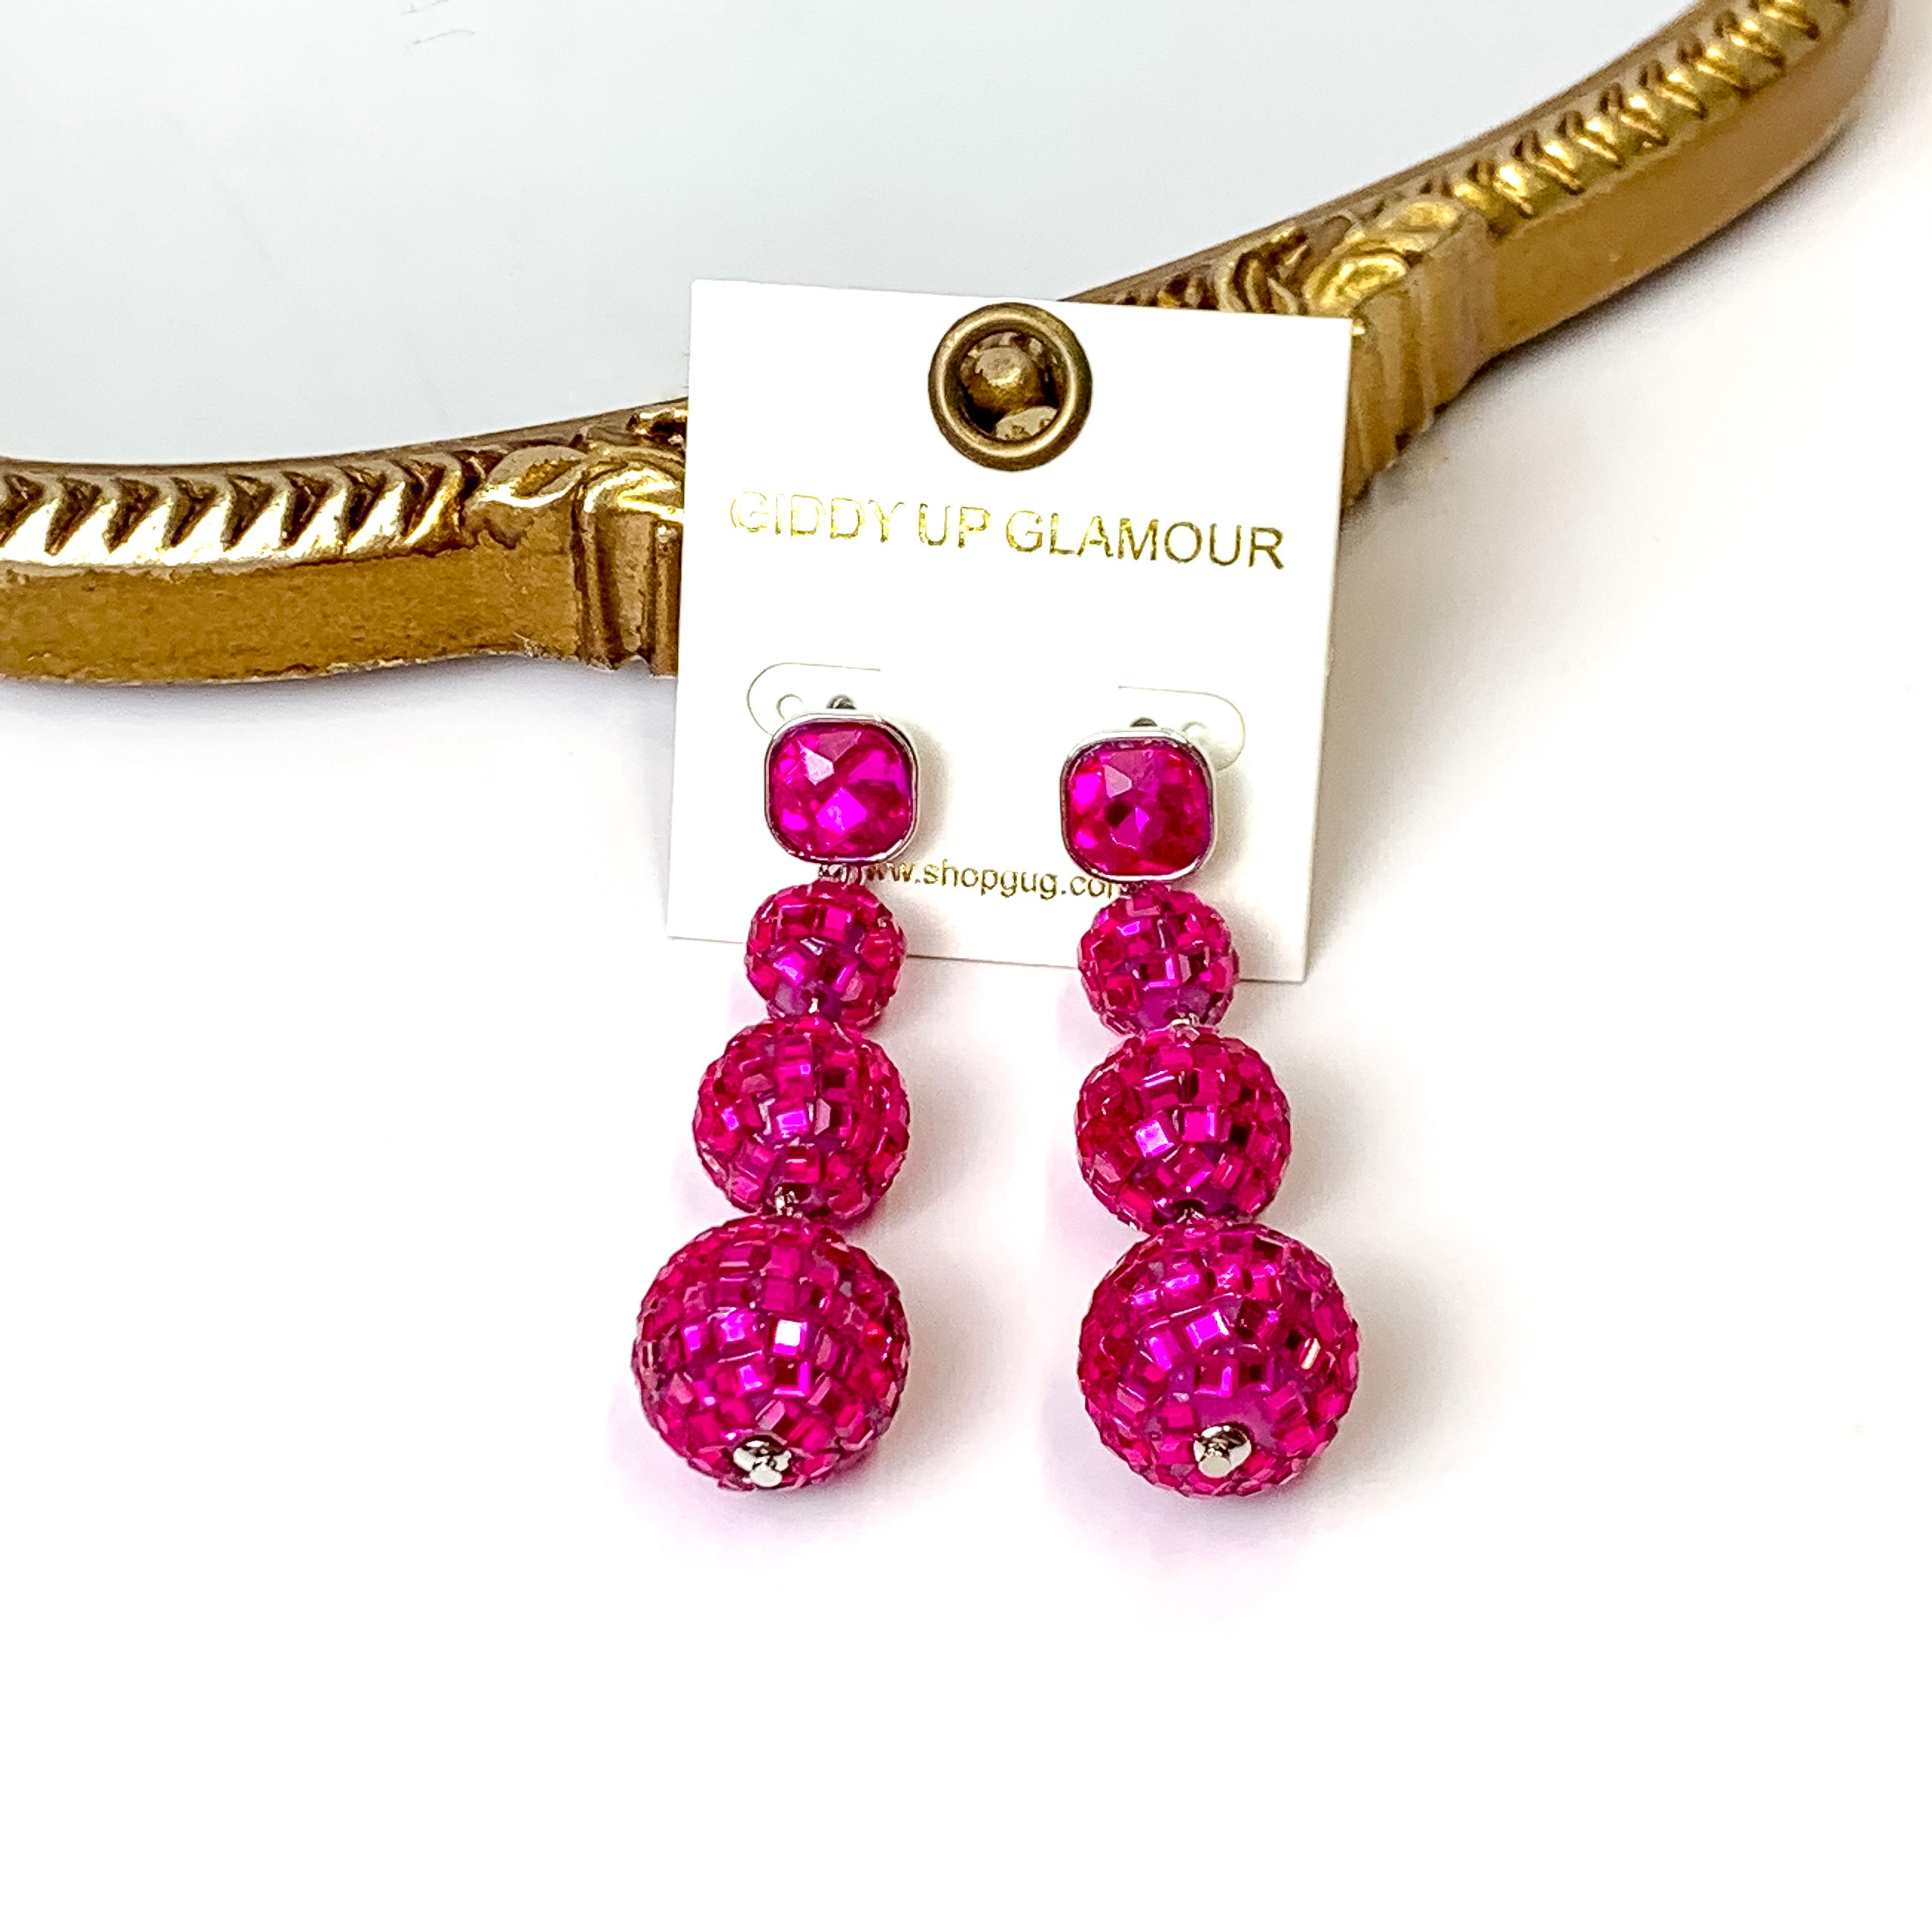 Cushion Crystal Post Disco Ball Dangle Earrings in Fuchsia Pink - Giddy Up Glamour Boutique